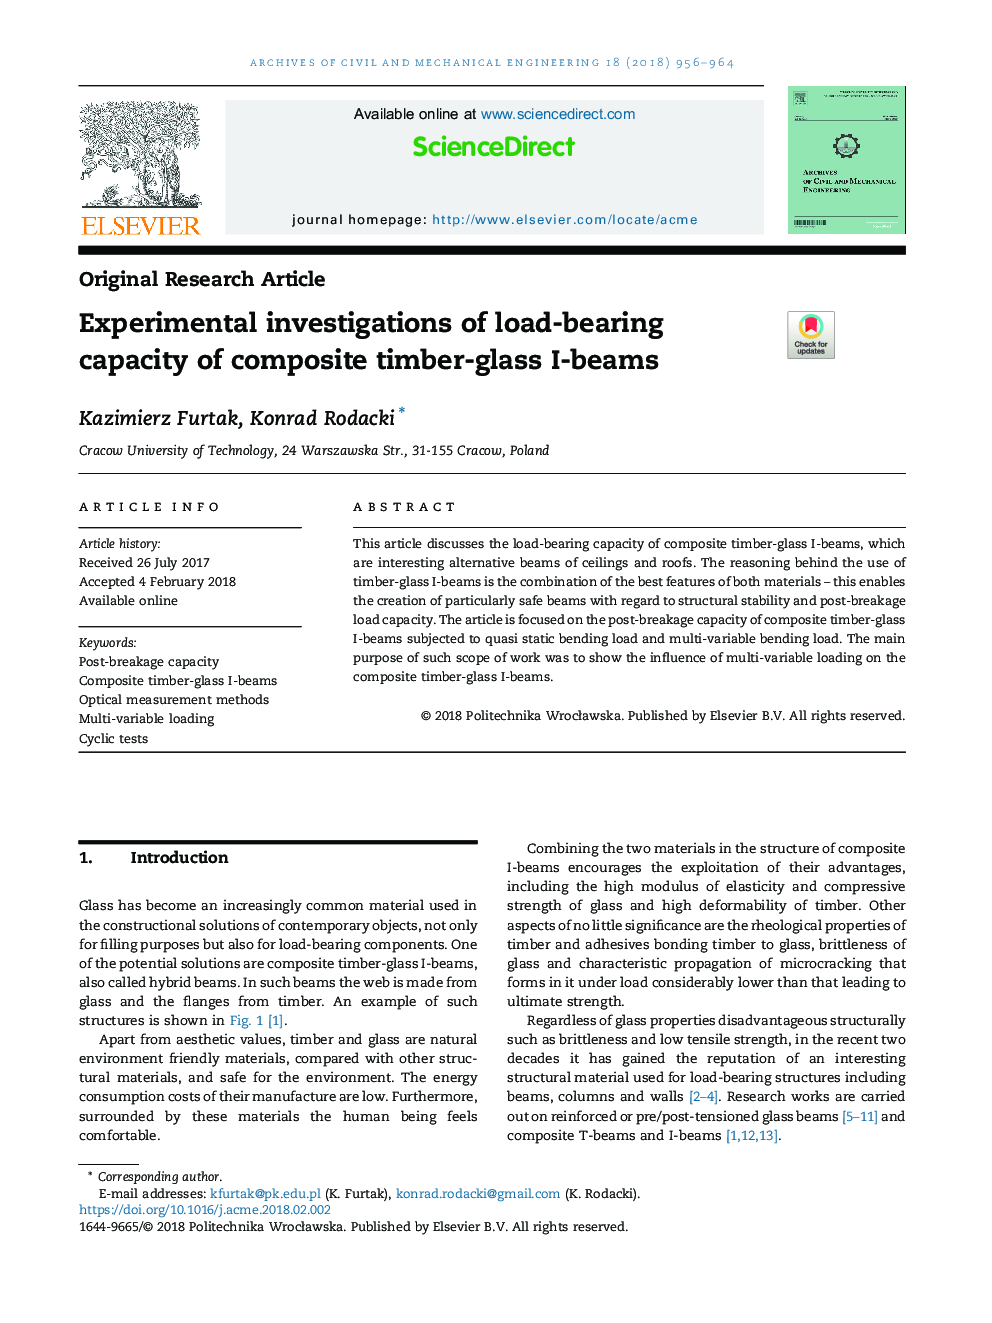 Experimental investigations of load-bearing capacity of composite timber-glass I-beams